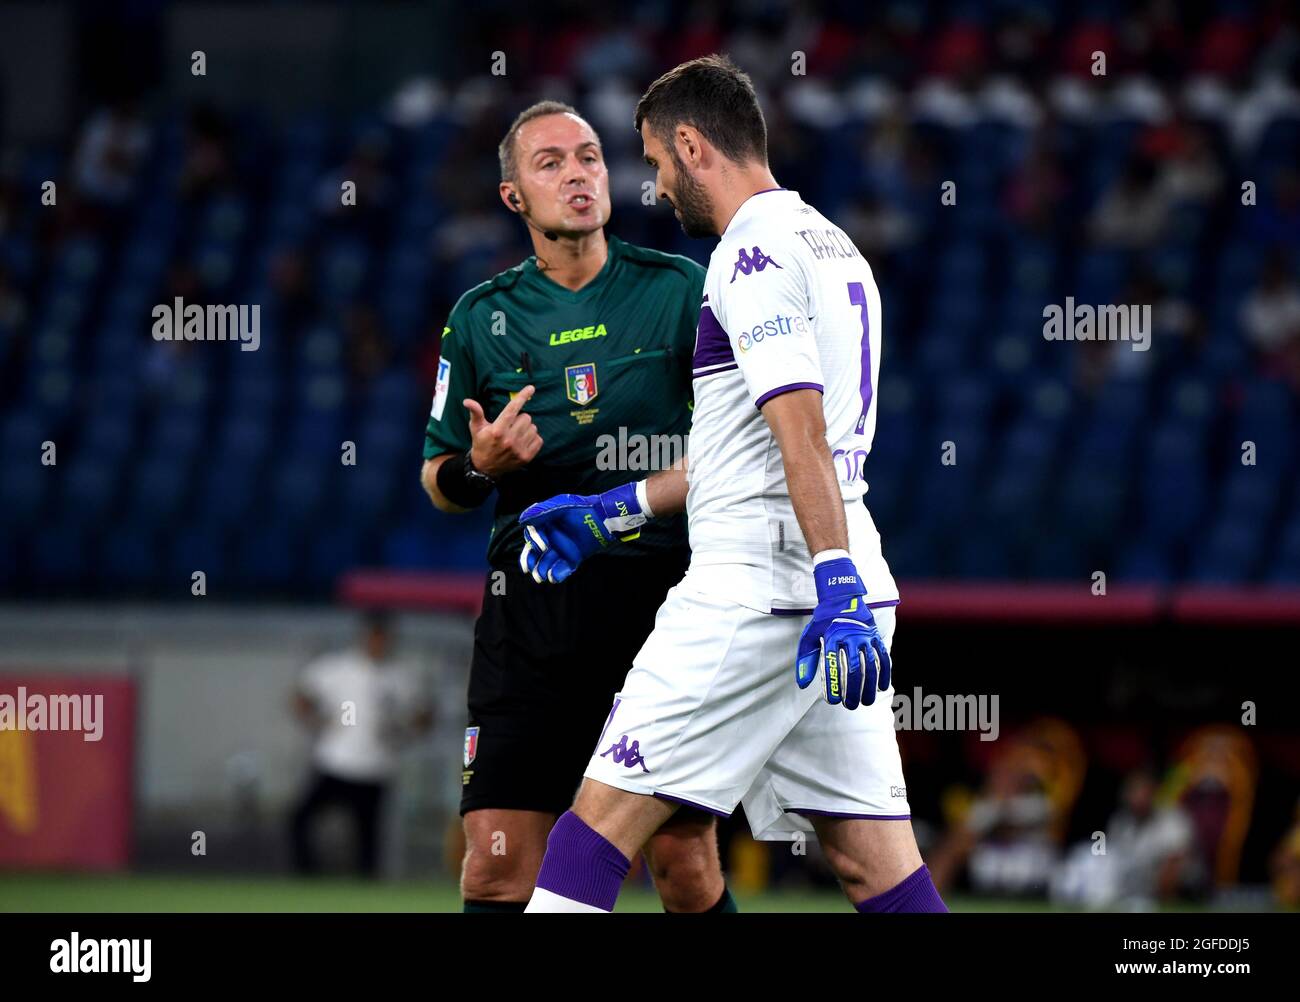 ROME, ITALY - AUGUST 22: Referee Luca Pairetto argues with Pietro Terracciano of ACF Fiorentina after Bartlomiej Dragowski of ACF Fiorentina leaves the pitch after being sent off for a Red card ,during the Serie A match between AS Roma v ACF Fiorentina at Stadio Olimpico on August 22, 2021 in Rome, Italy. (MB Media) Stock Photo